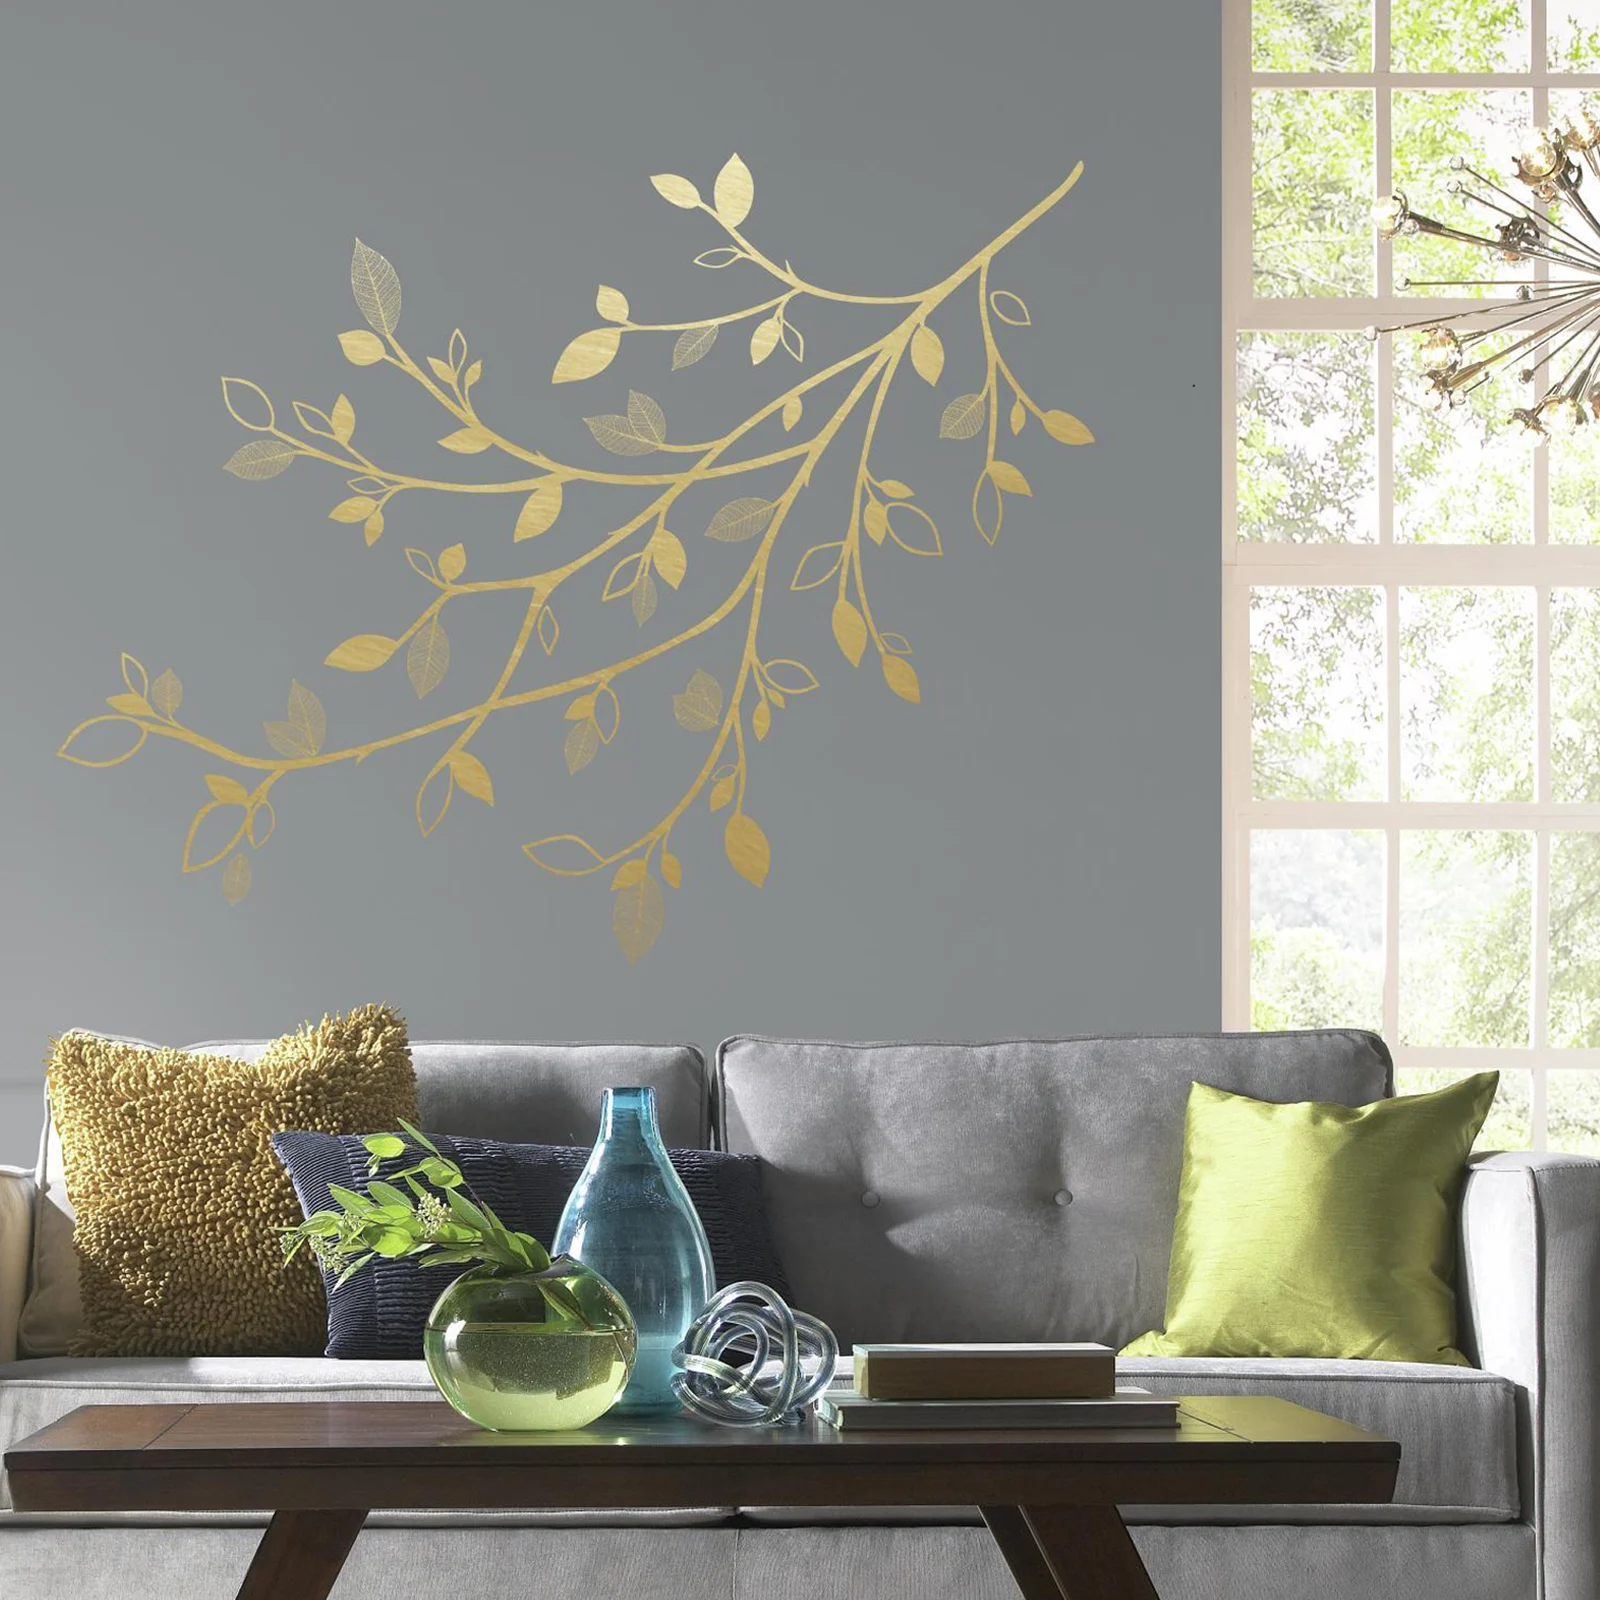 Peel & stick wall decals